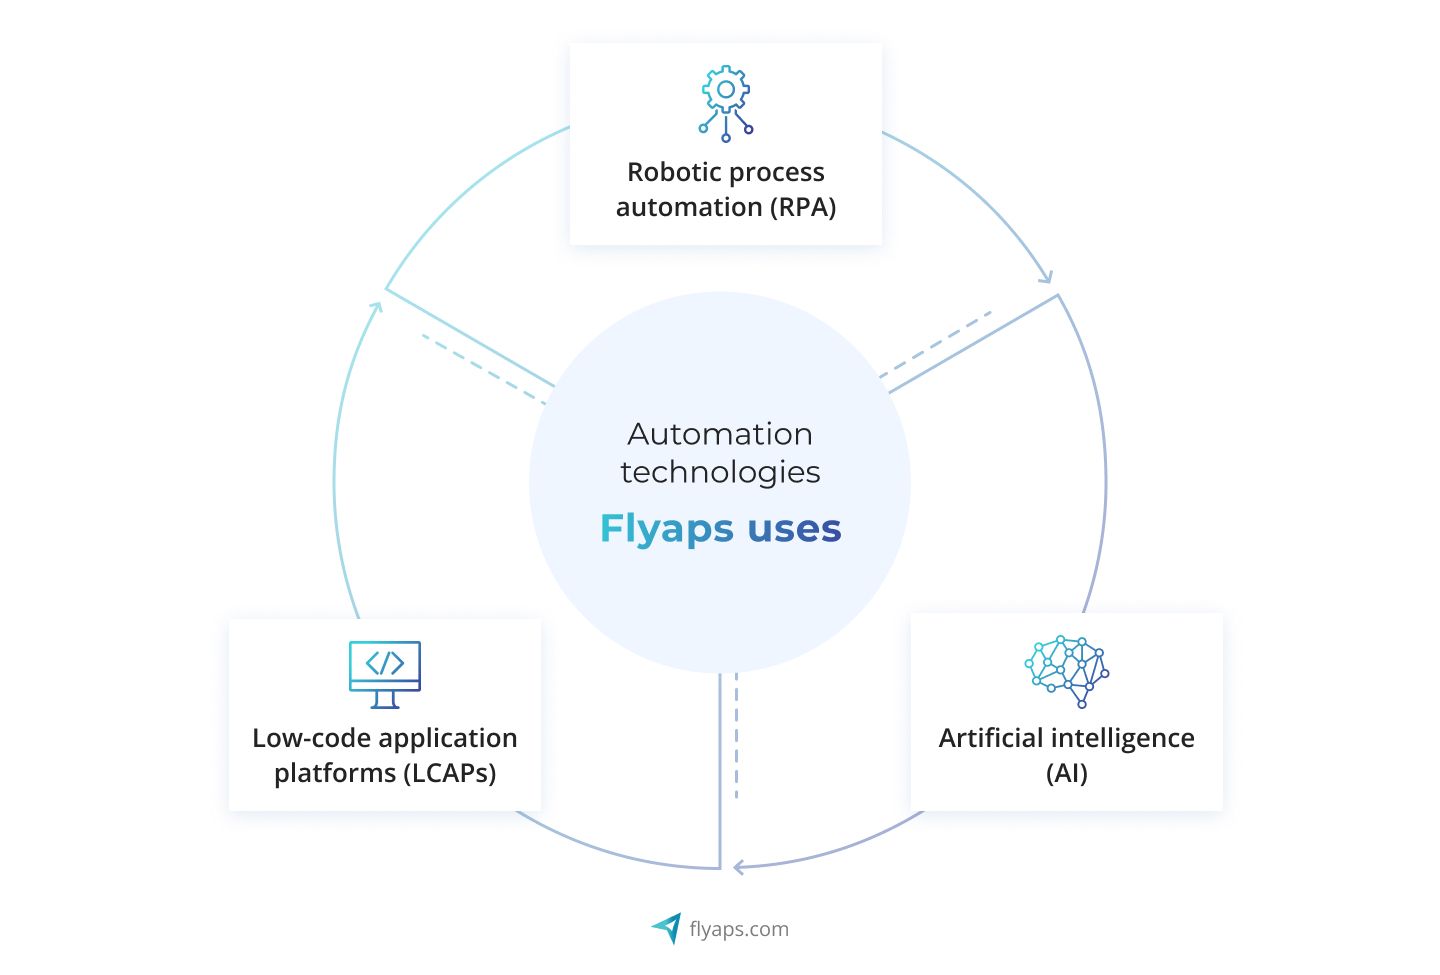 Flyaps automation technologies examples